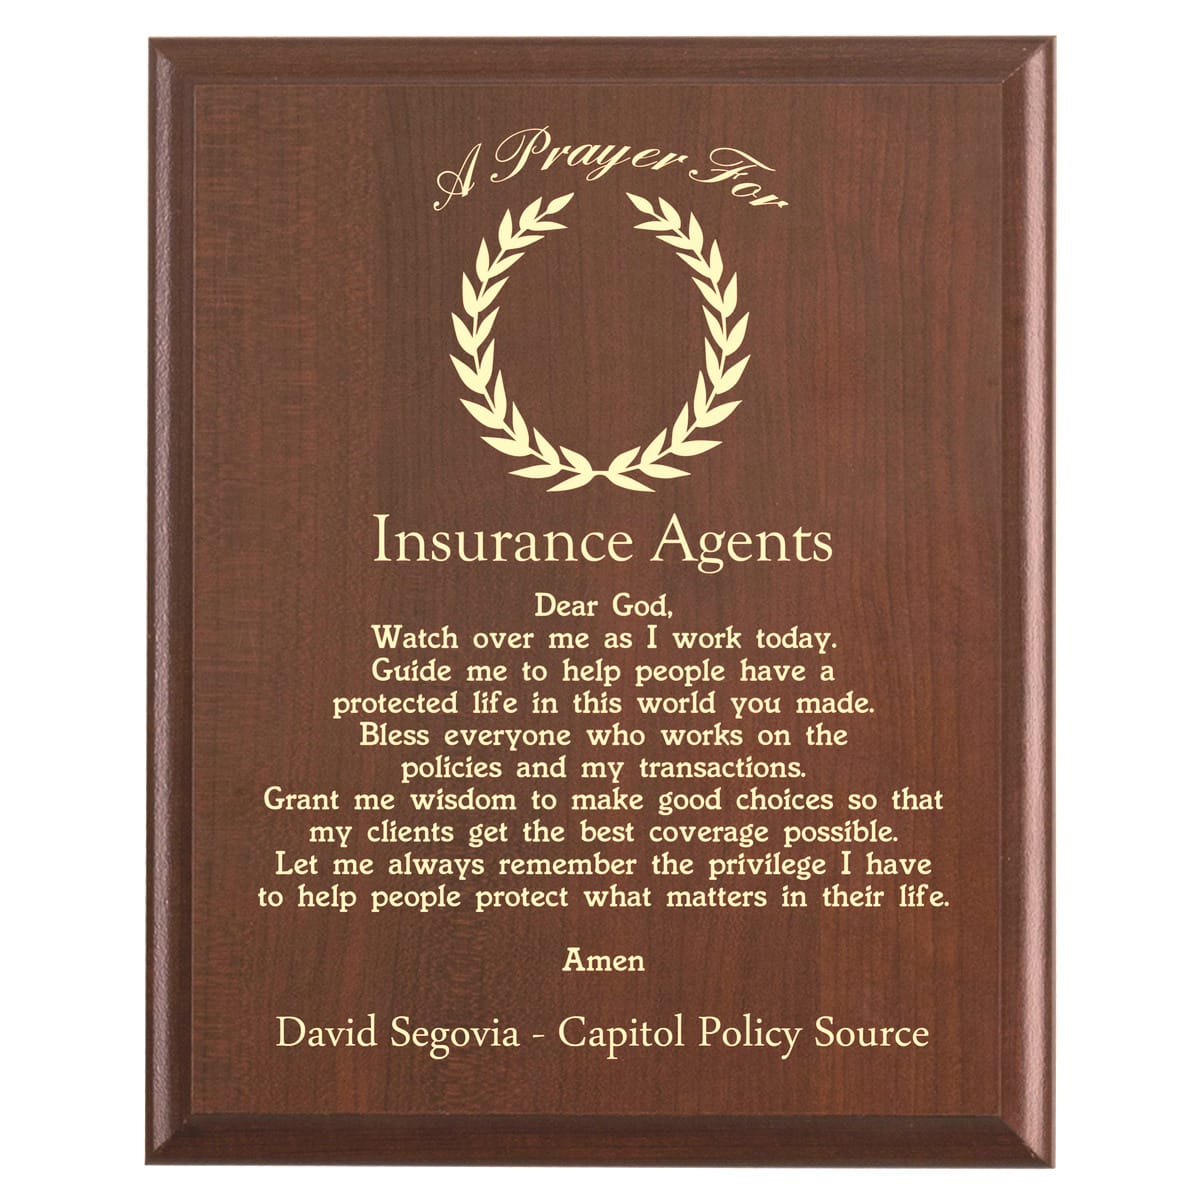 Plaque photo: Insurance Agent Prayer Plaque design with free personalization. Wood style finish with customized text.